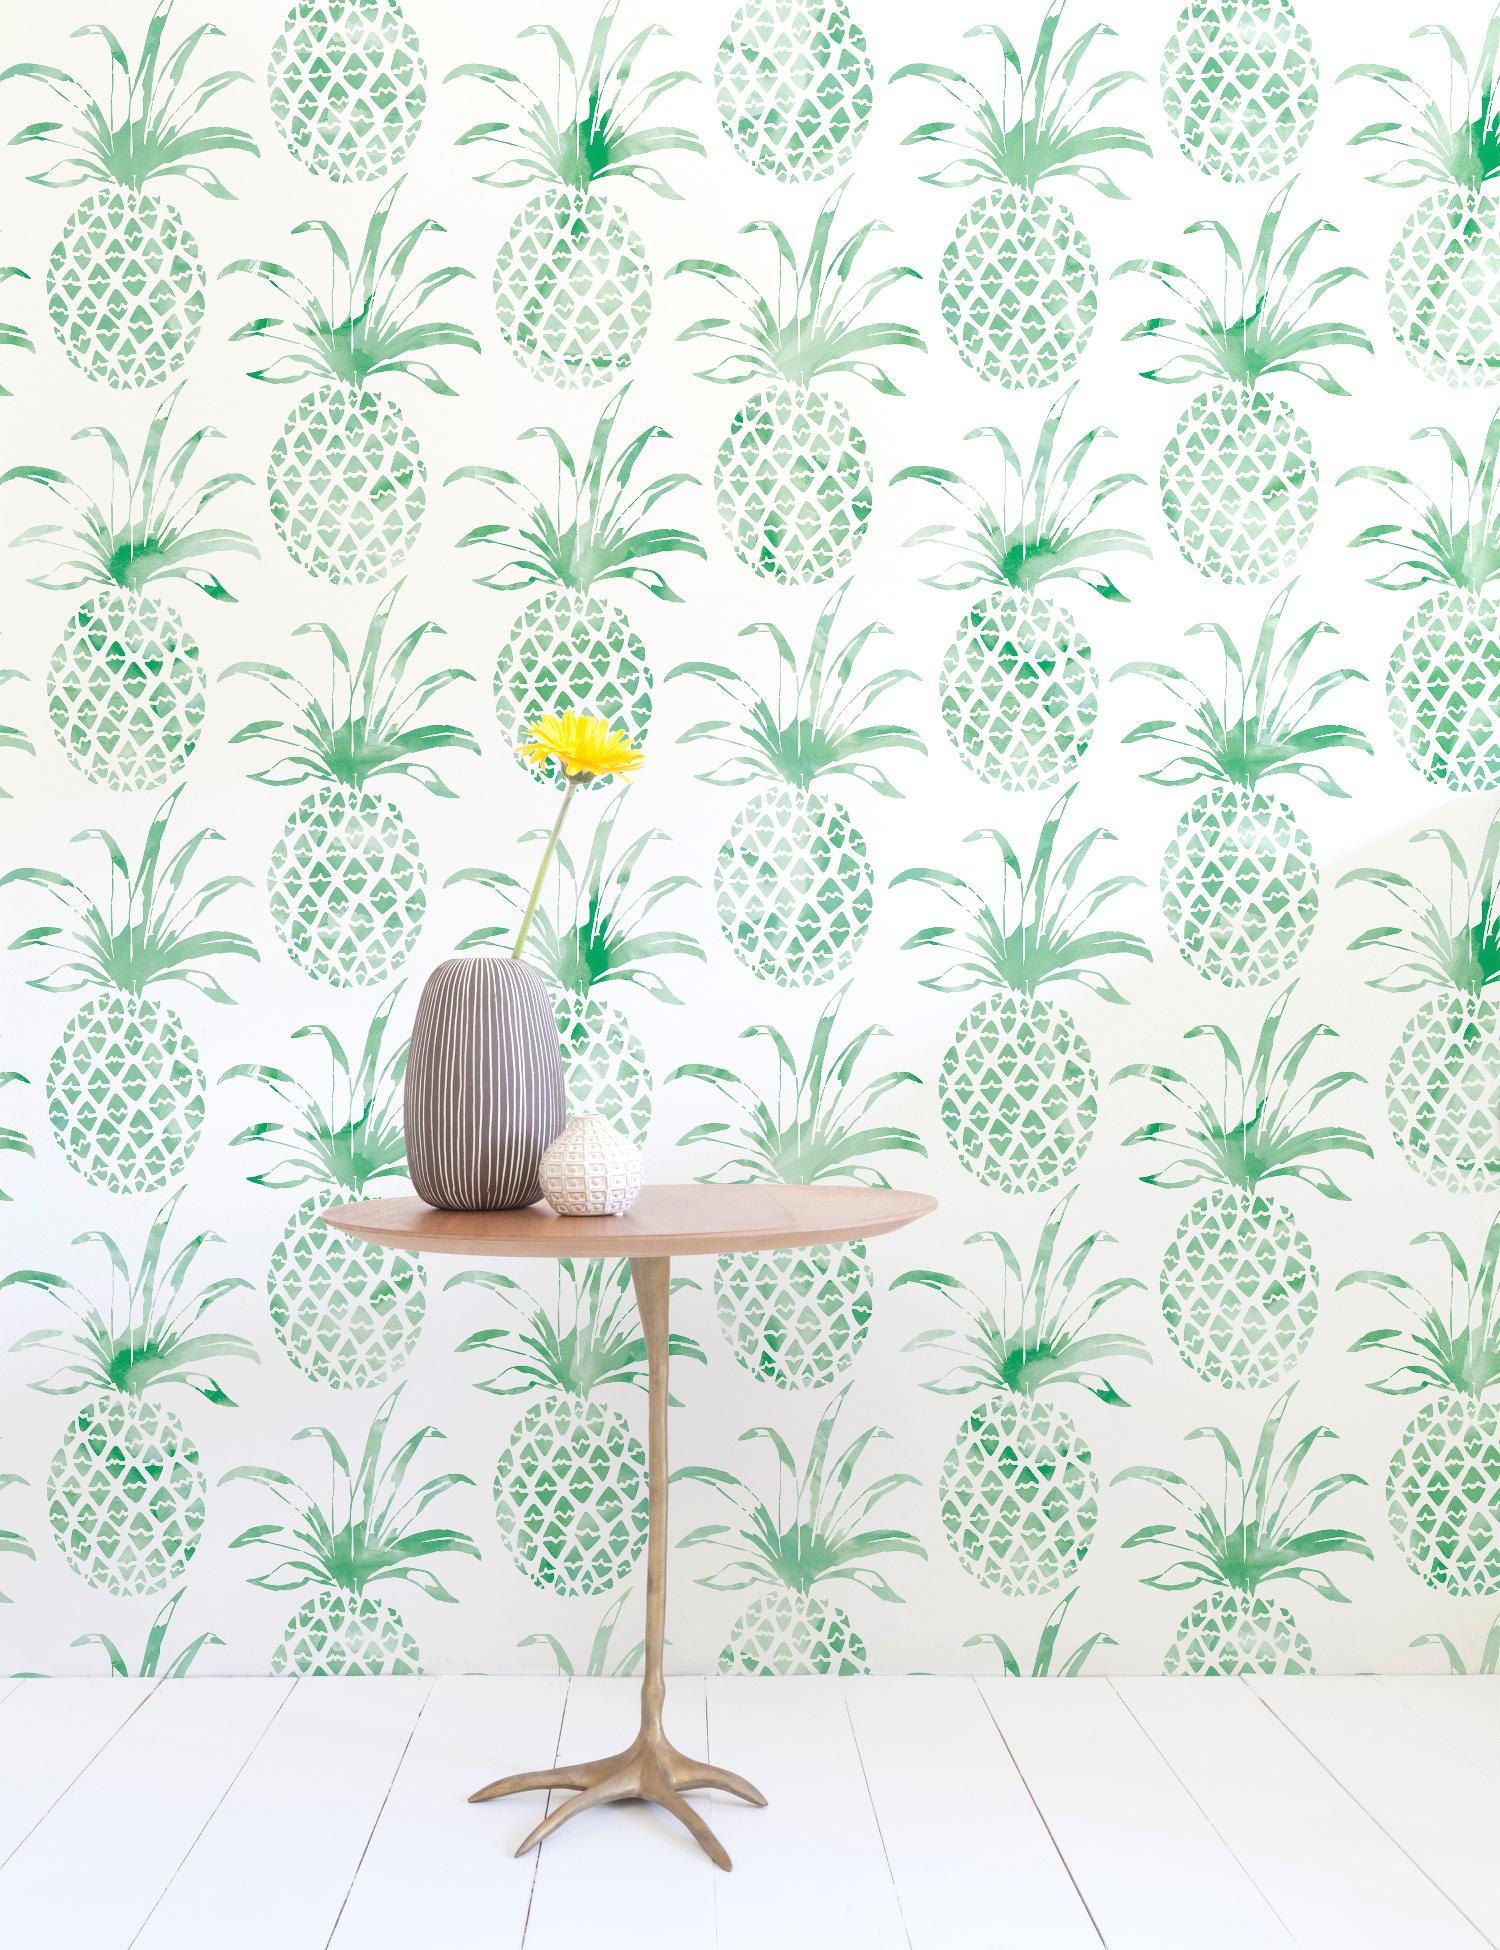 The tropical feeling of Piña Pintada wallpaper is sure to remind you of the islands, all year long.

Samples are available for $18 including US shipping, please message us to purchase.

Printing: Digital pigment print (minimum order of 4 rolls).